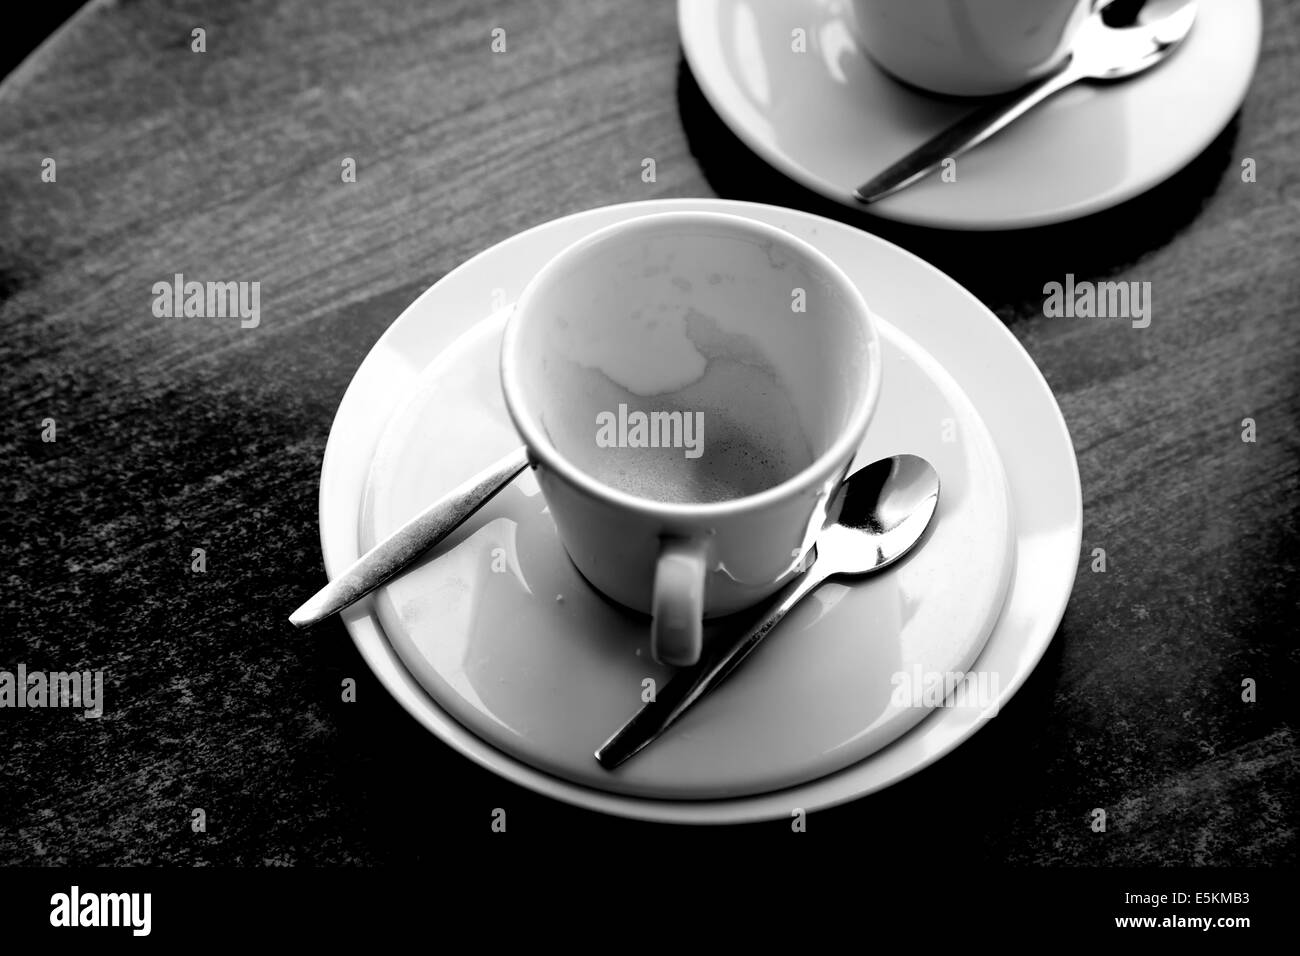 Empty Coffee Cup, Hot drink Stock Photo